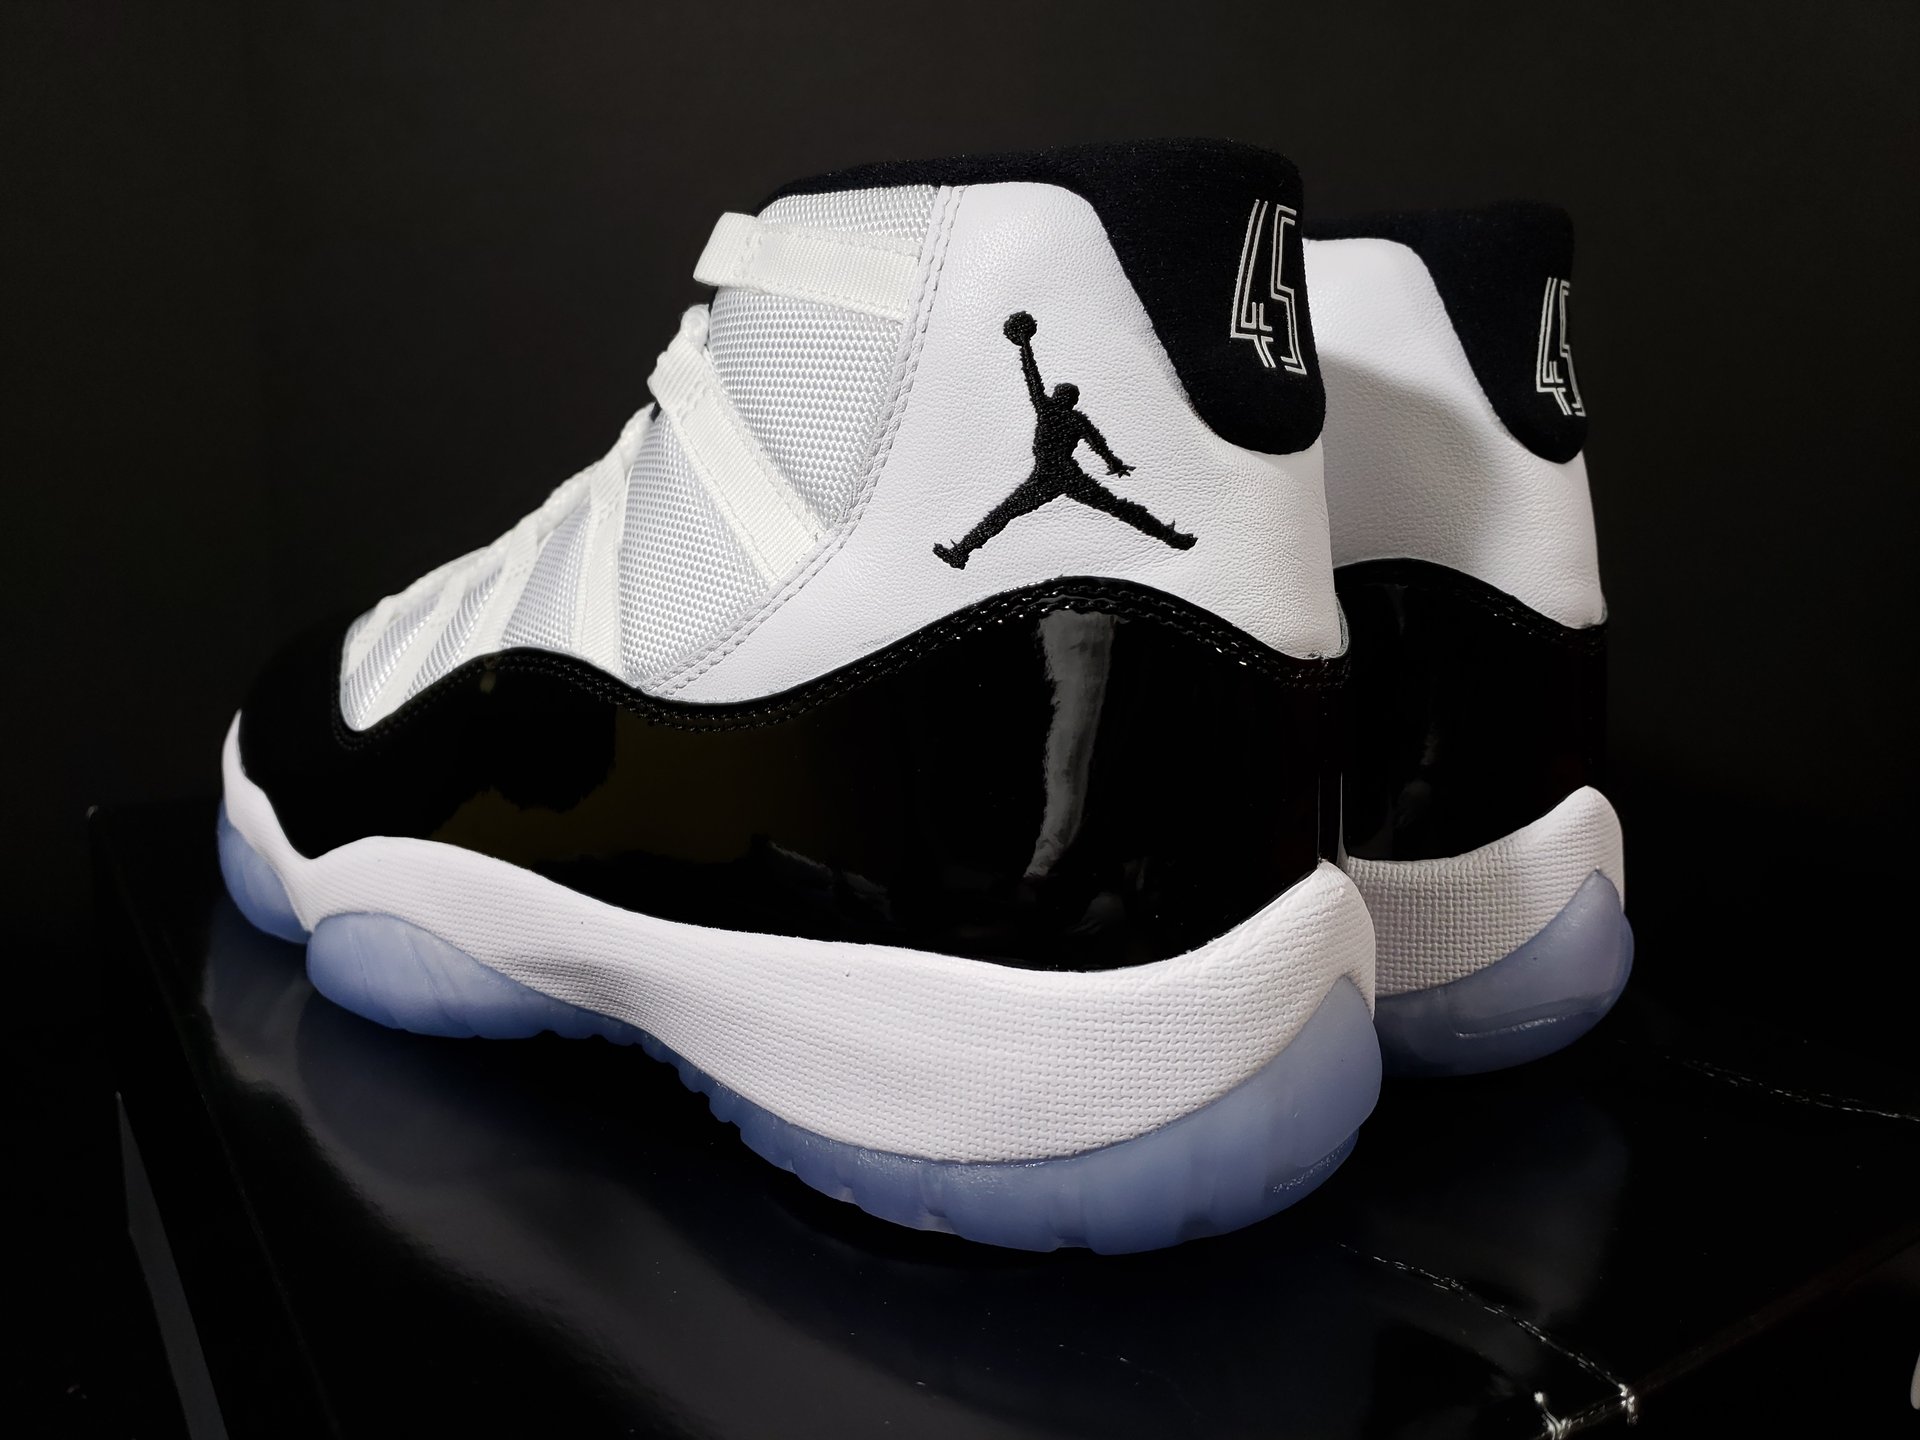 muelle Paradoja Bienes diversos Why the 2018 Air Jordan 11 'Concord' is the Shoe of the Year - WearTesters